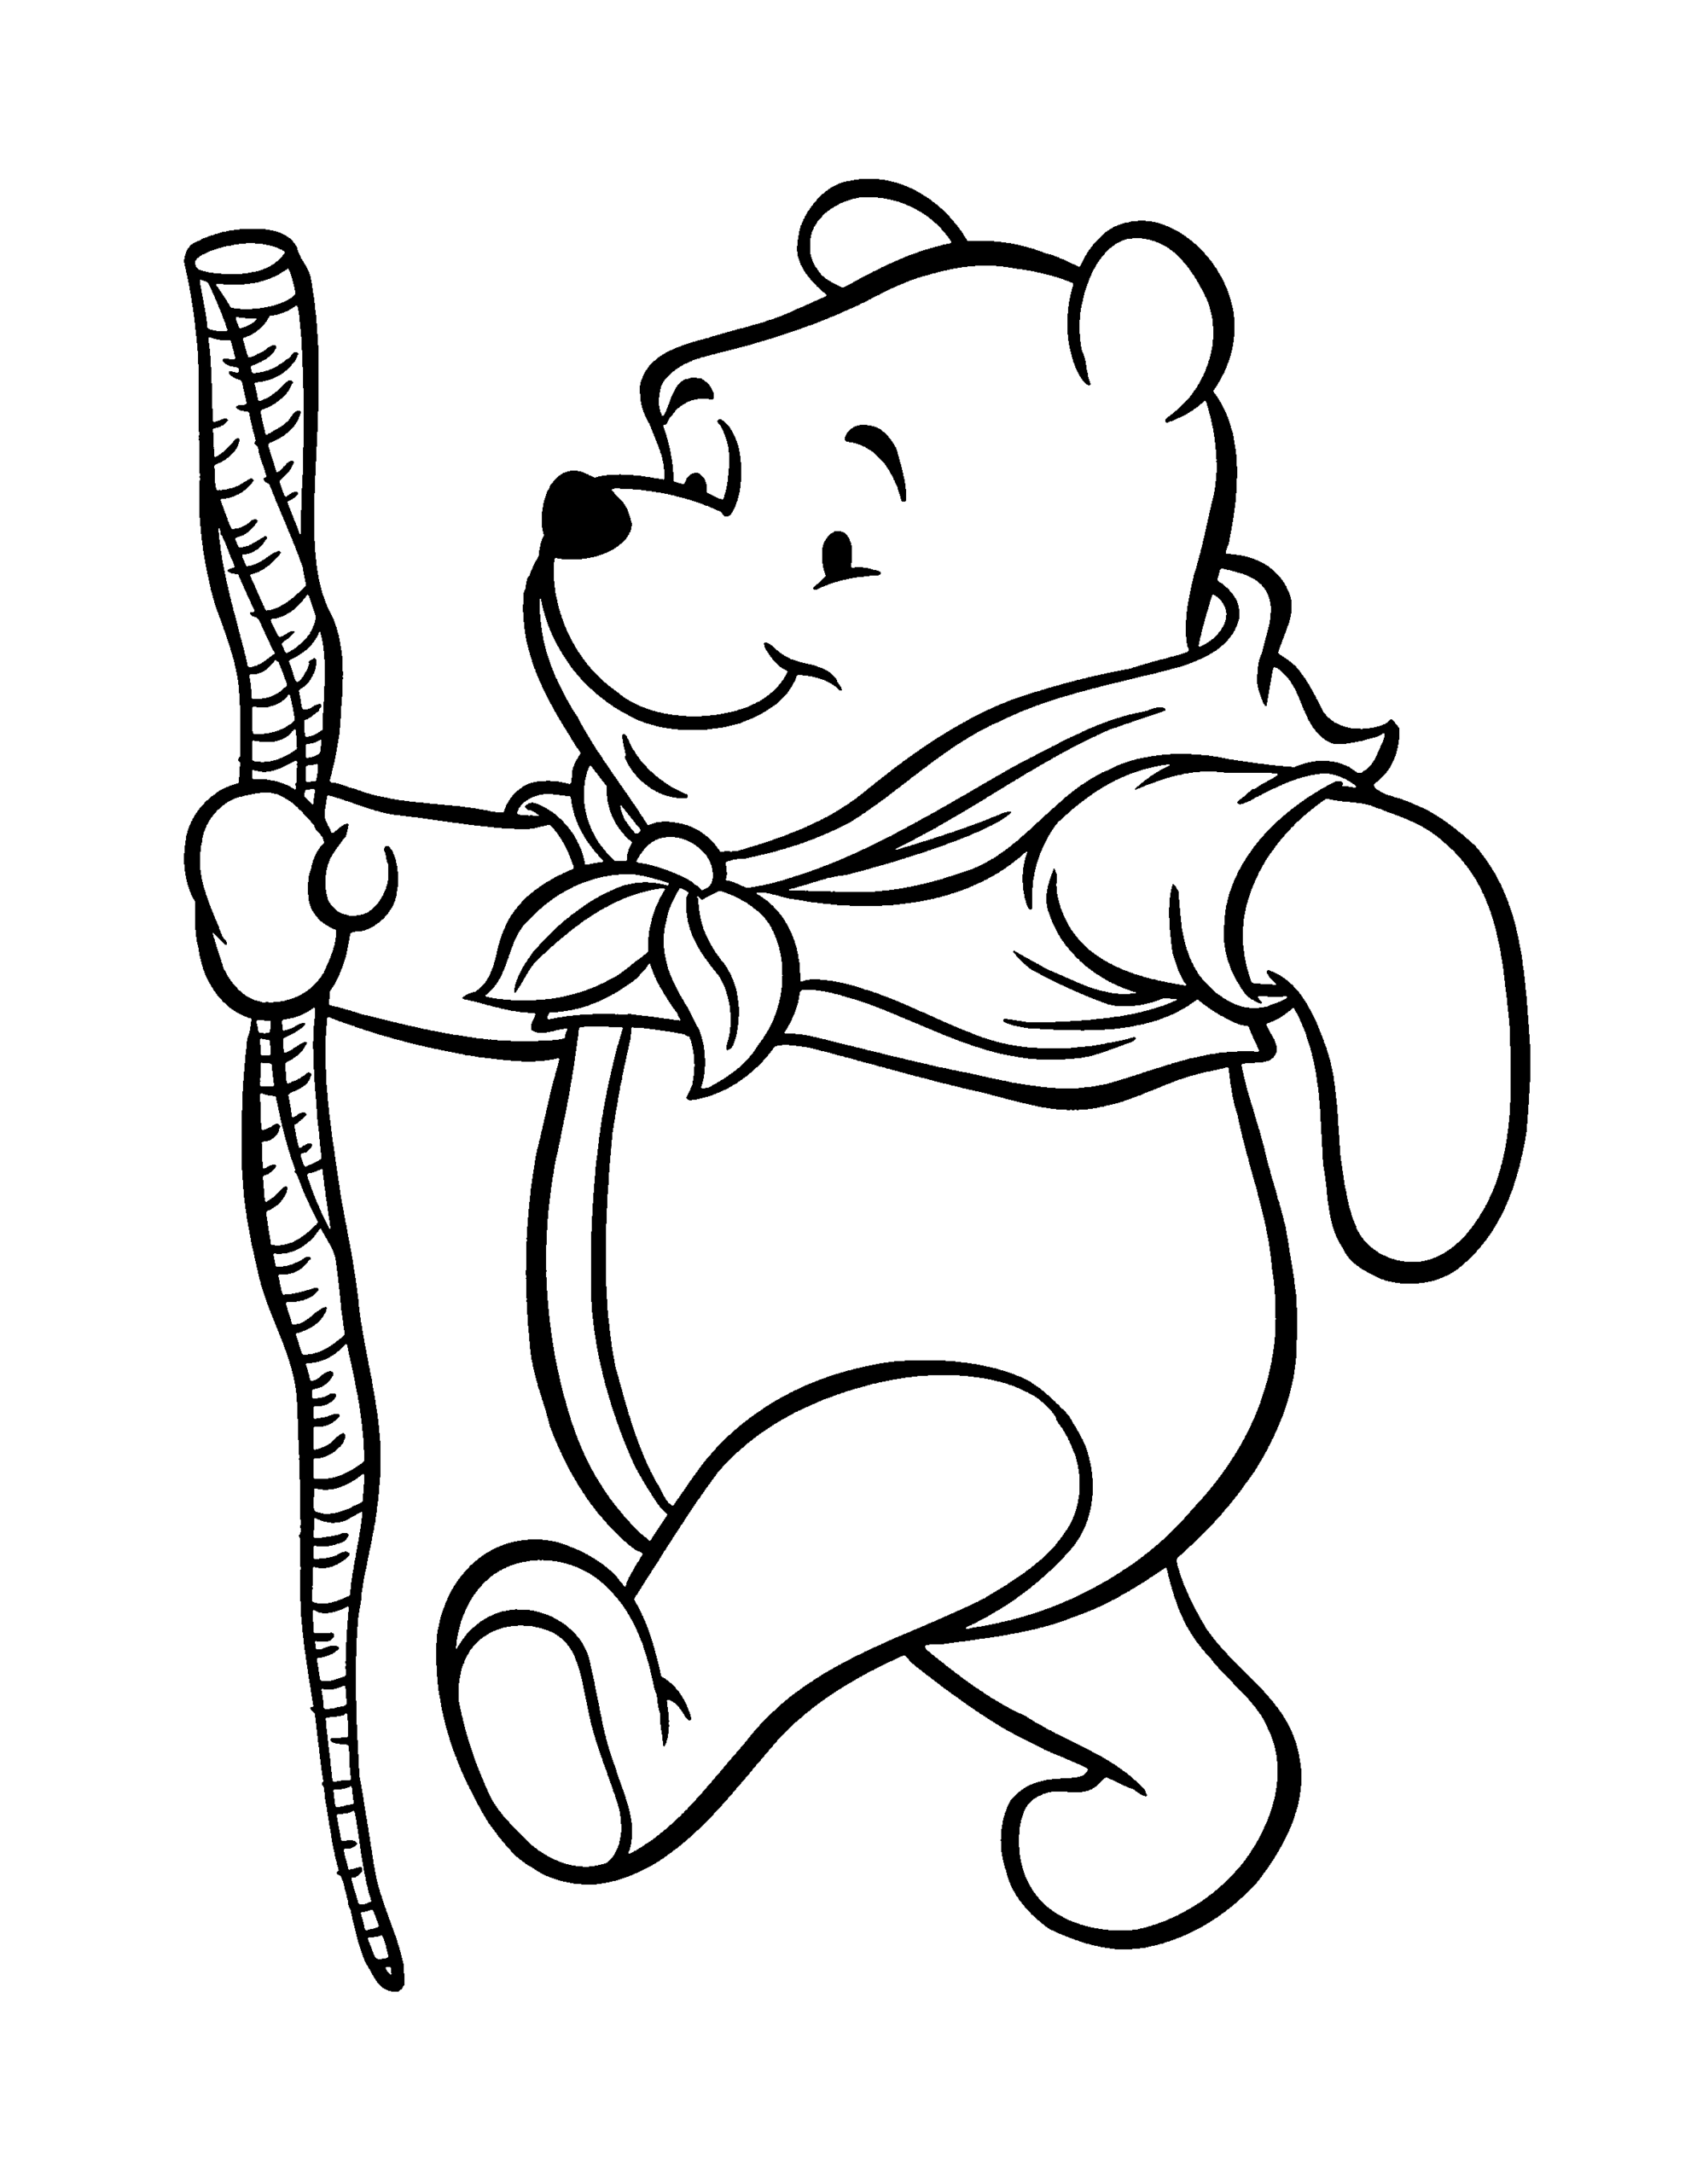 Winnie the Pooh Coloring Pages Cartoons winnie the pooh 110 Printable 2020 7090 Coloring4free